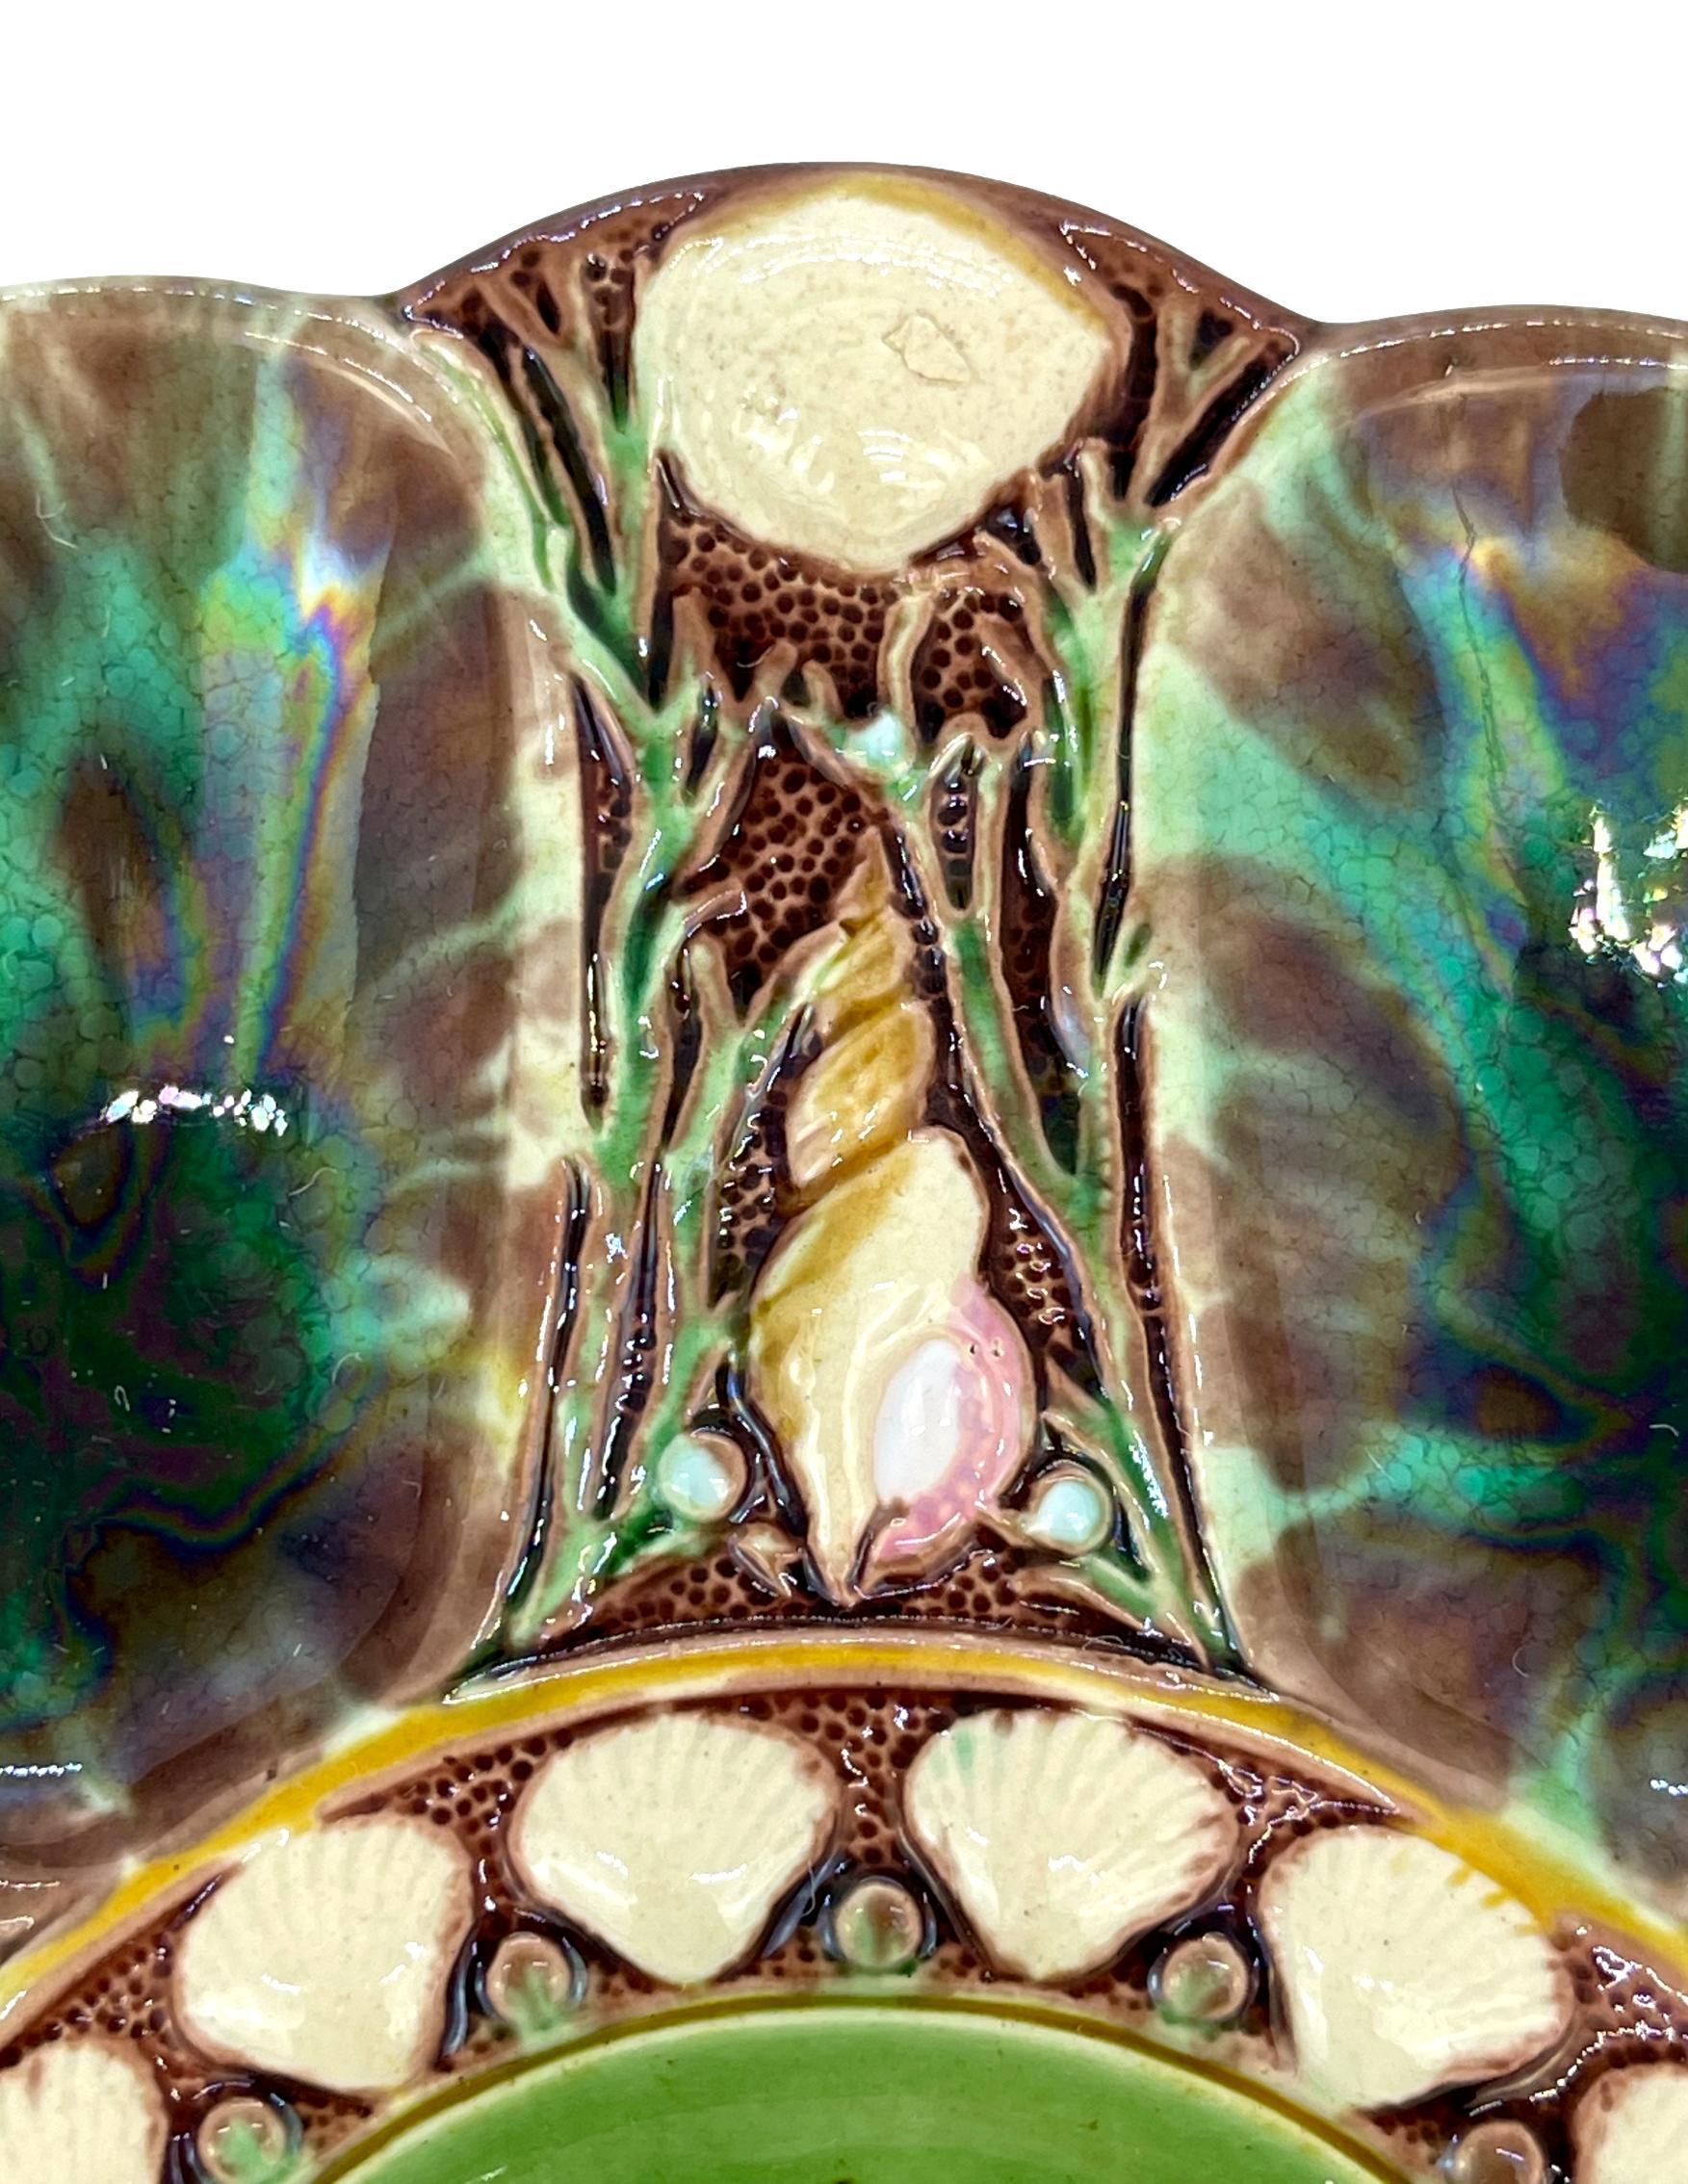 Molded Minton Majolica Oyster Plate, 'MOTTLED, ' Green and Brown, English, Dated 1871